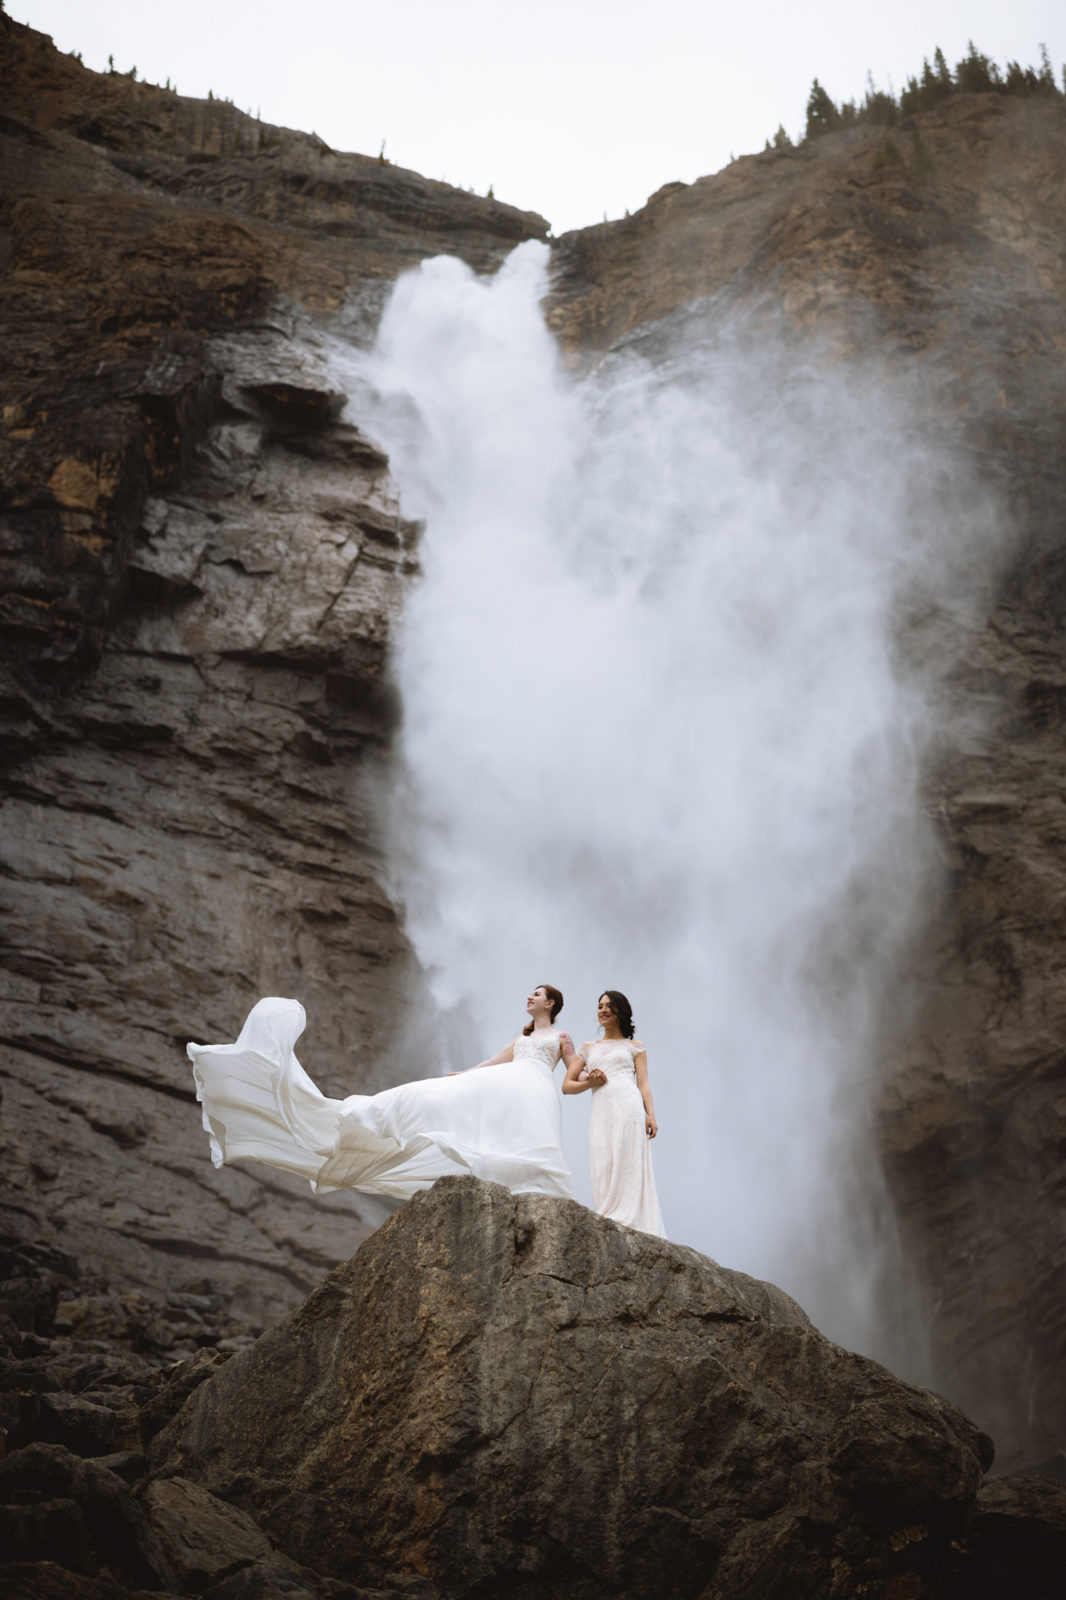 Two brides with romantic gowns billowing, stand in front of a waterfall for their Elopement in Yoho National Park